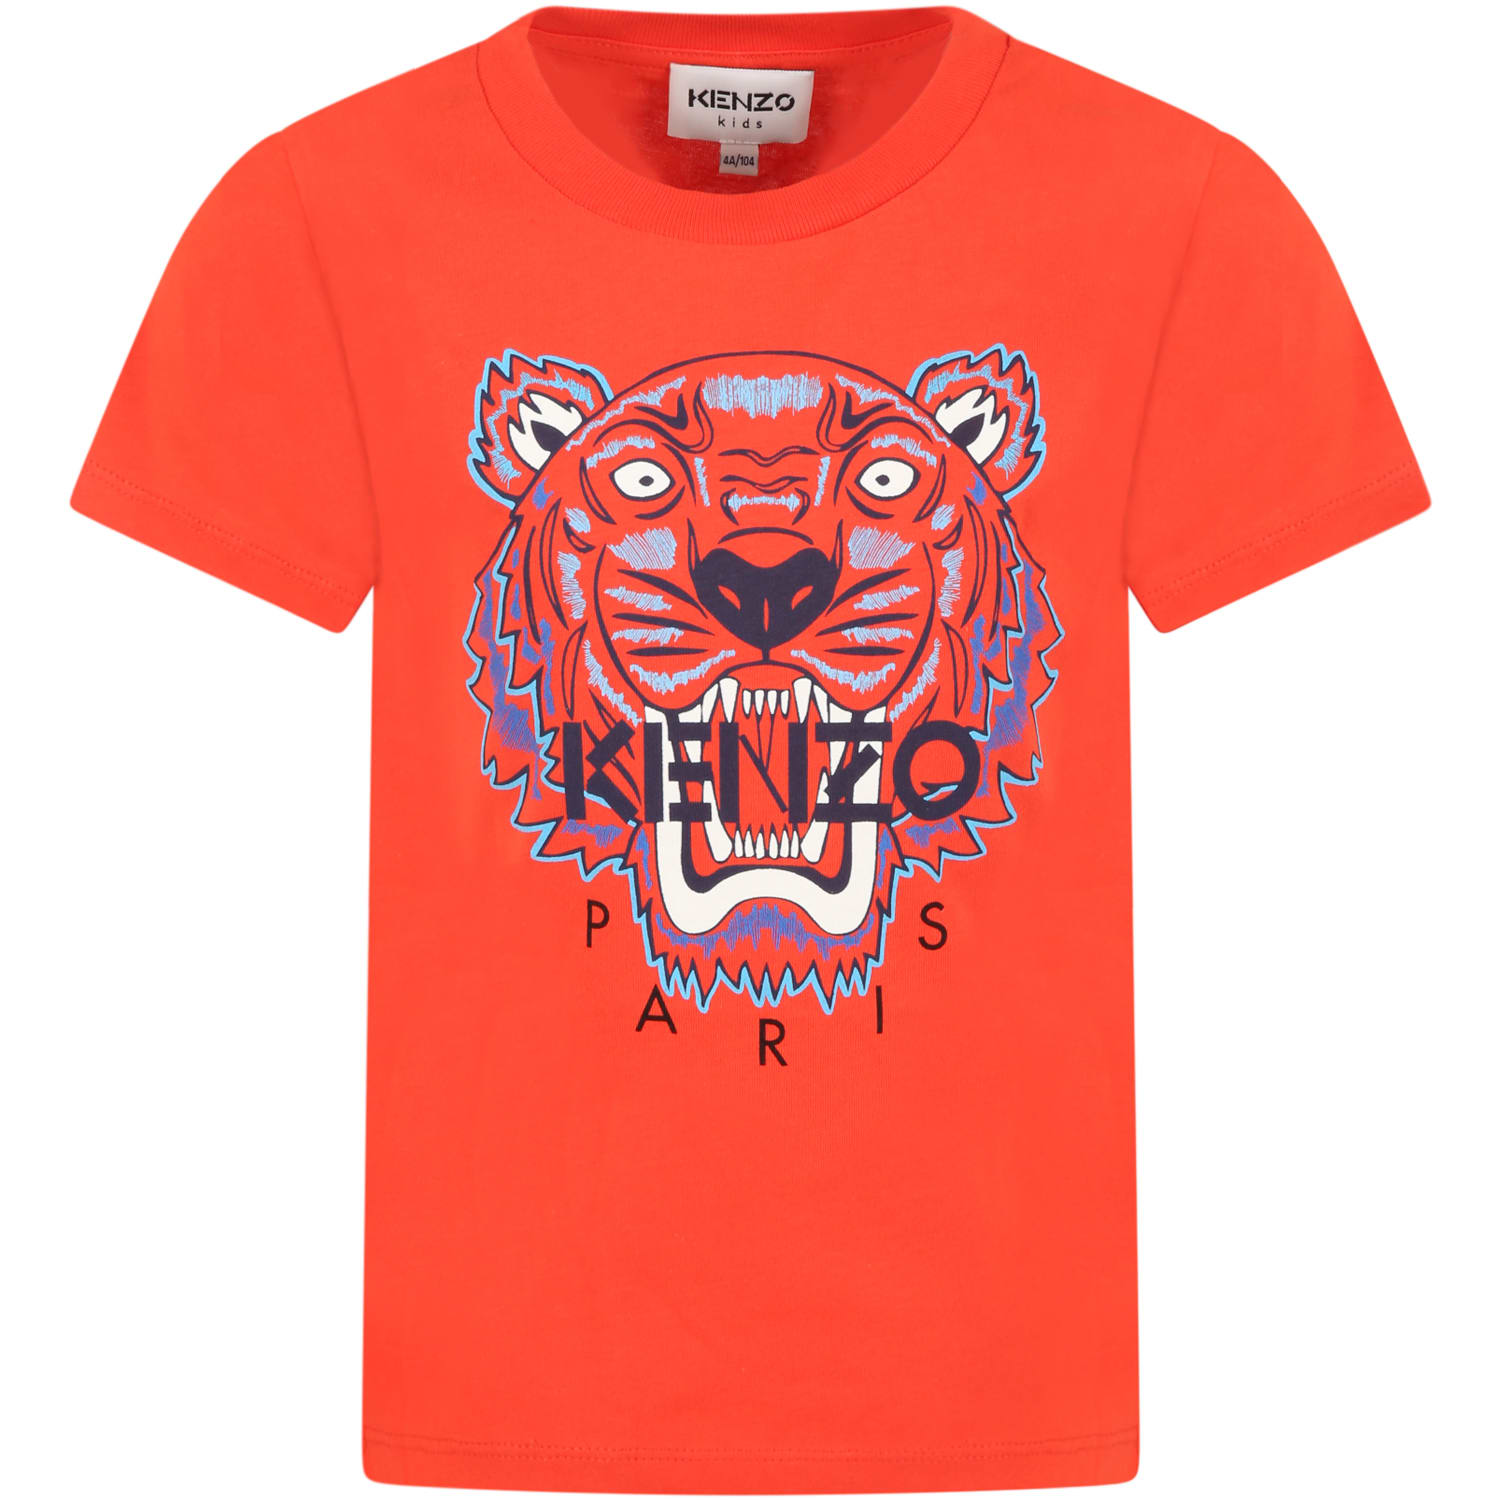 KENZO RED T-SHIRT FOR BOY WITH ICONIC TIGER,K25100 971